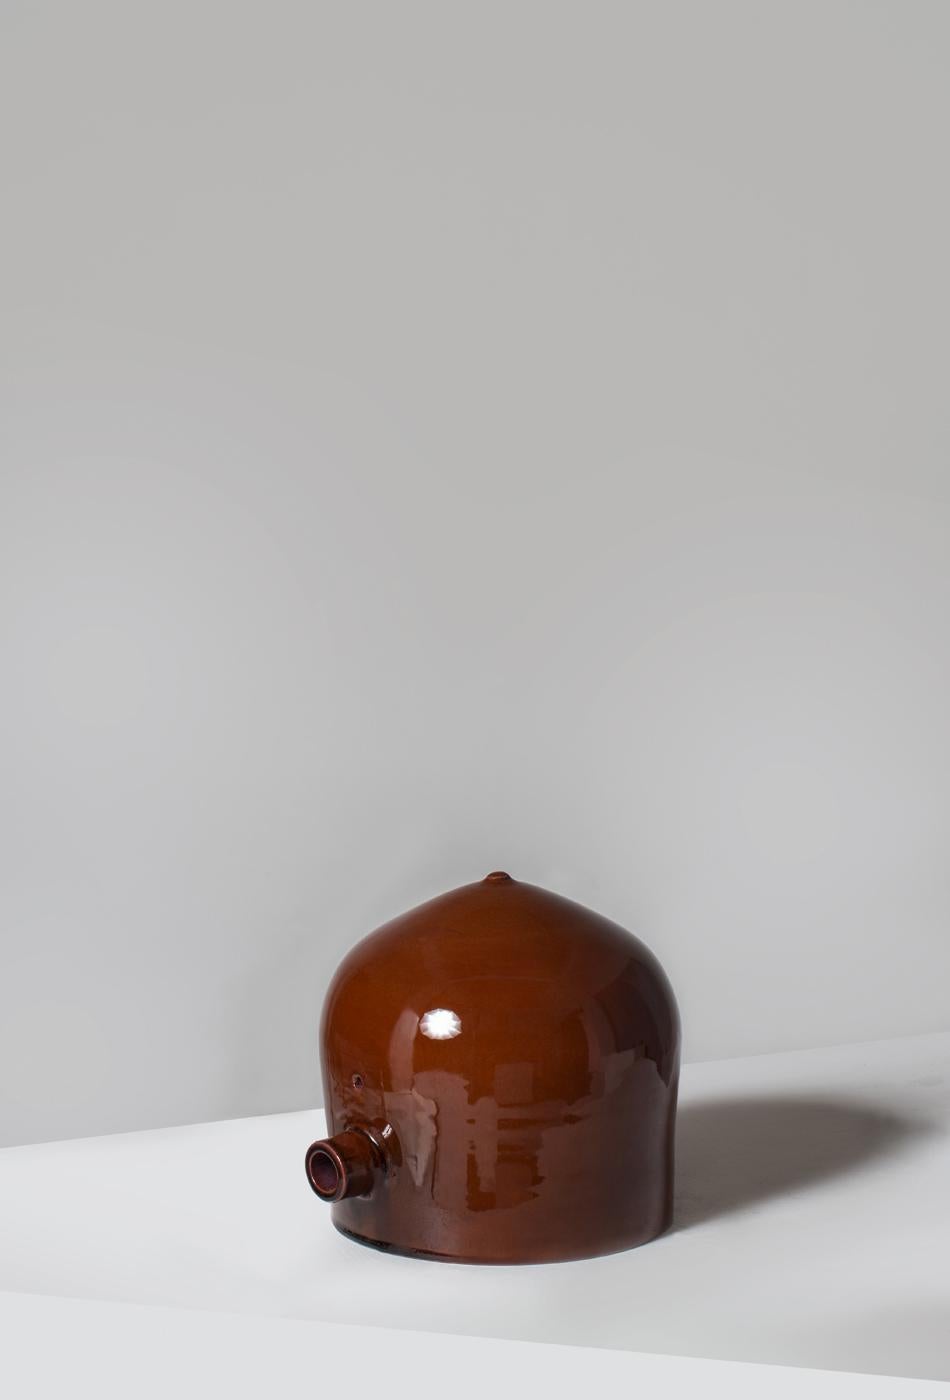 Contemporary Earth-Toned Abba Collection of Ceramic Vases Celebrates Ancient Water Urns For Sale